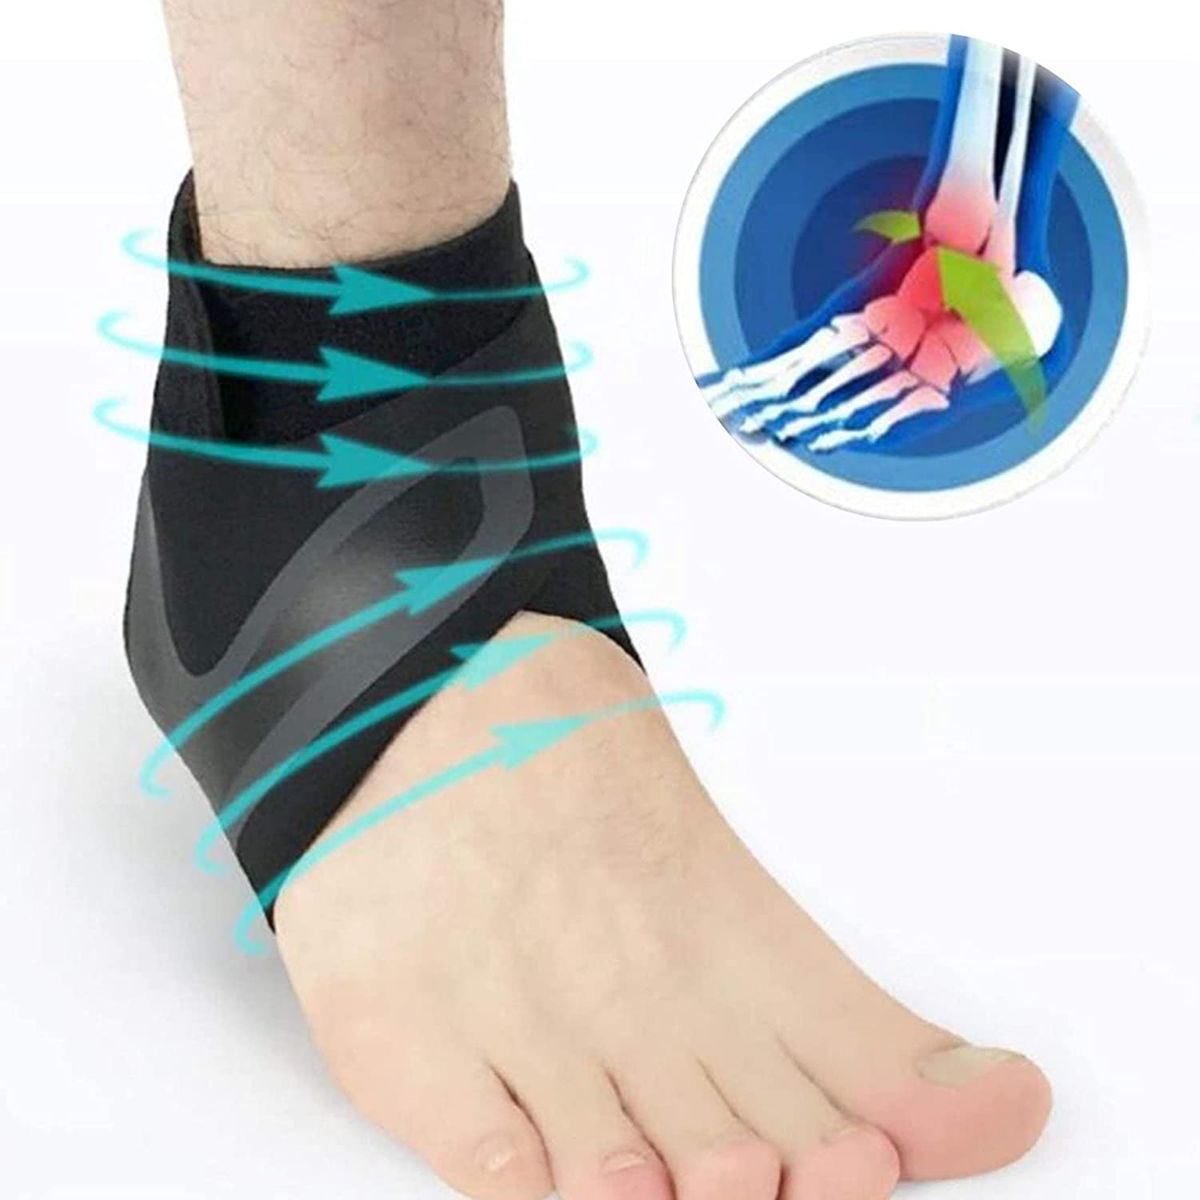 Spacelight Ankle Brace Adjustable Ankle Breathable Foot Brace Left and Right Feet Ankle Protection Sport Comfort Ankle Foot Brace for Strains